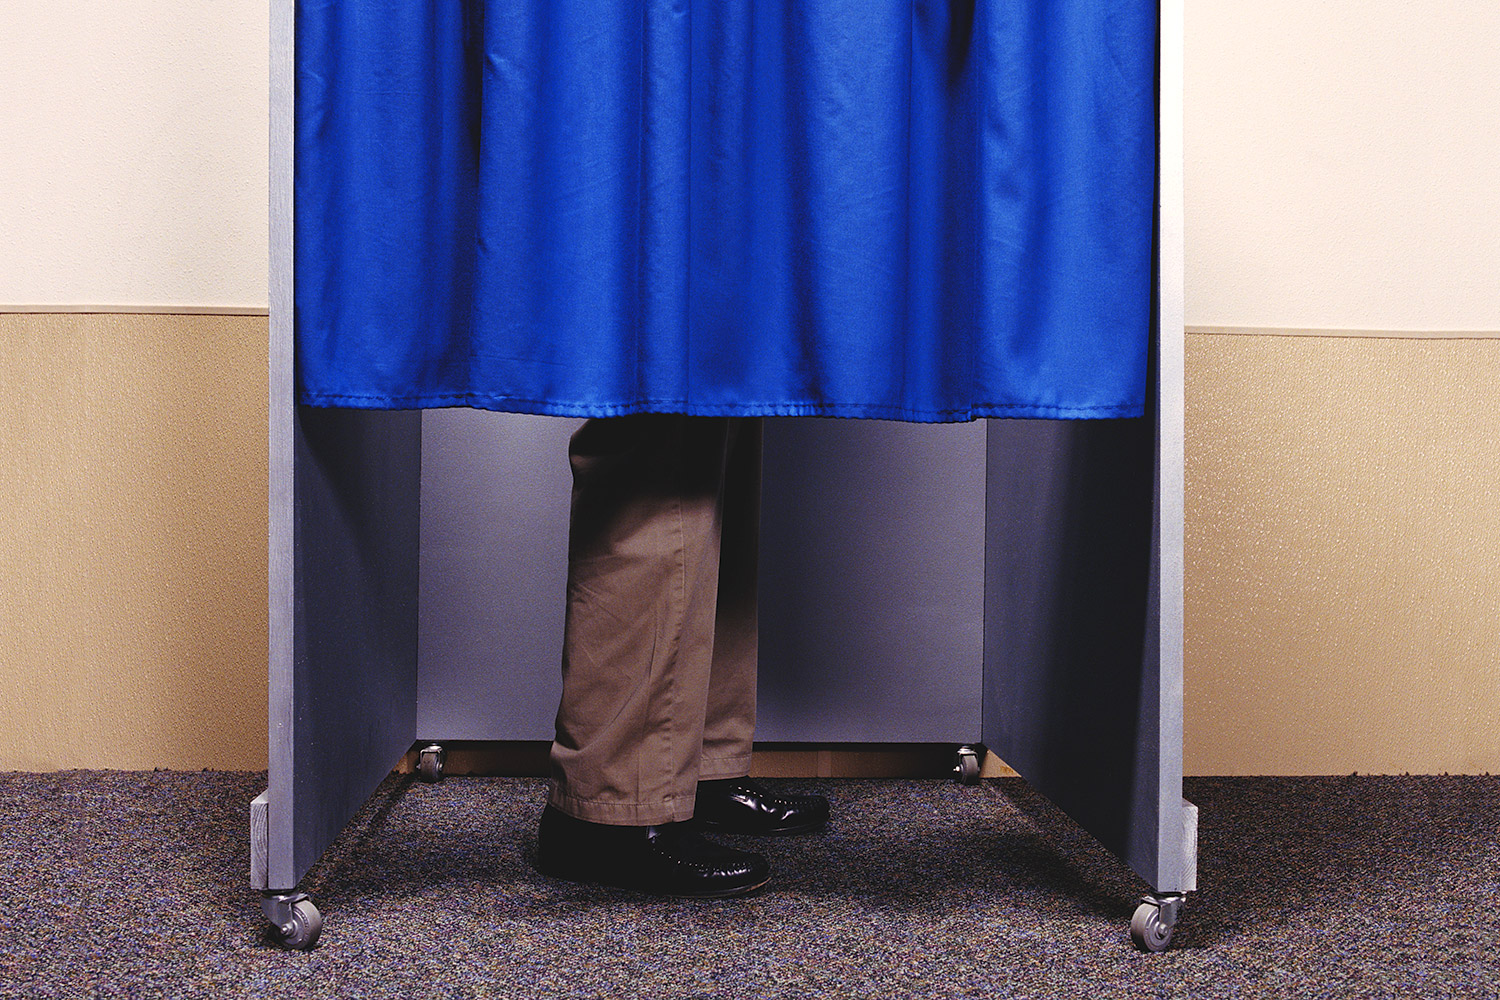 Person in a voting booth with a blue curtain pulled